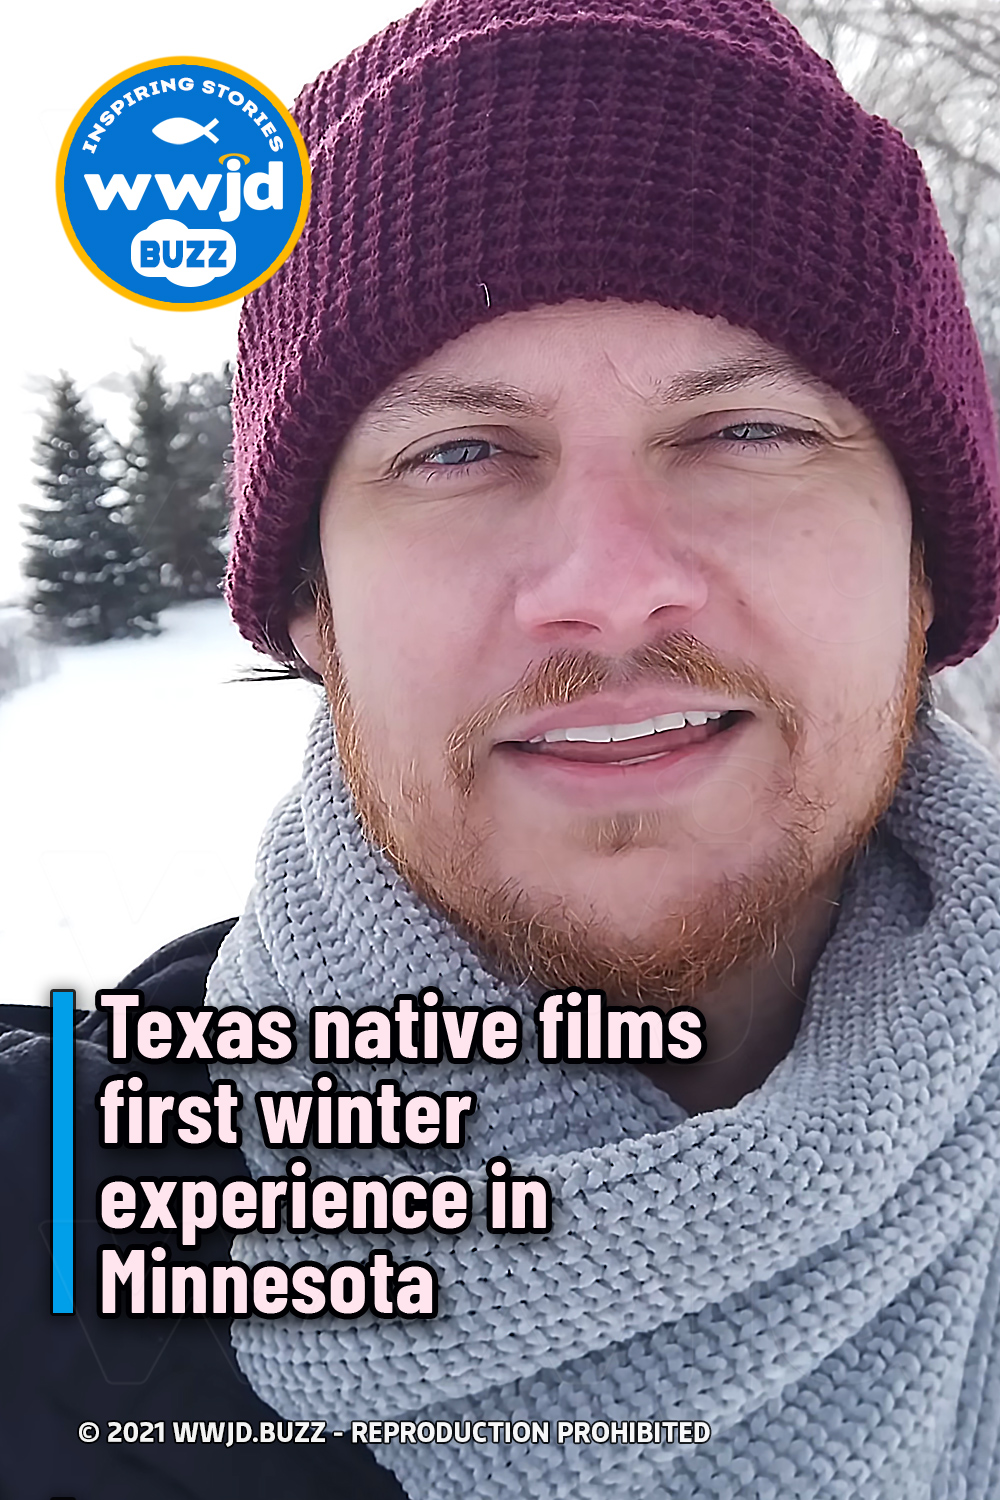 Texas native films first winter experience in Minnesota